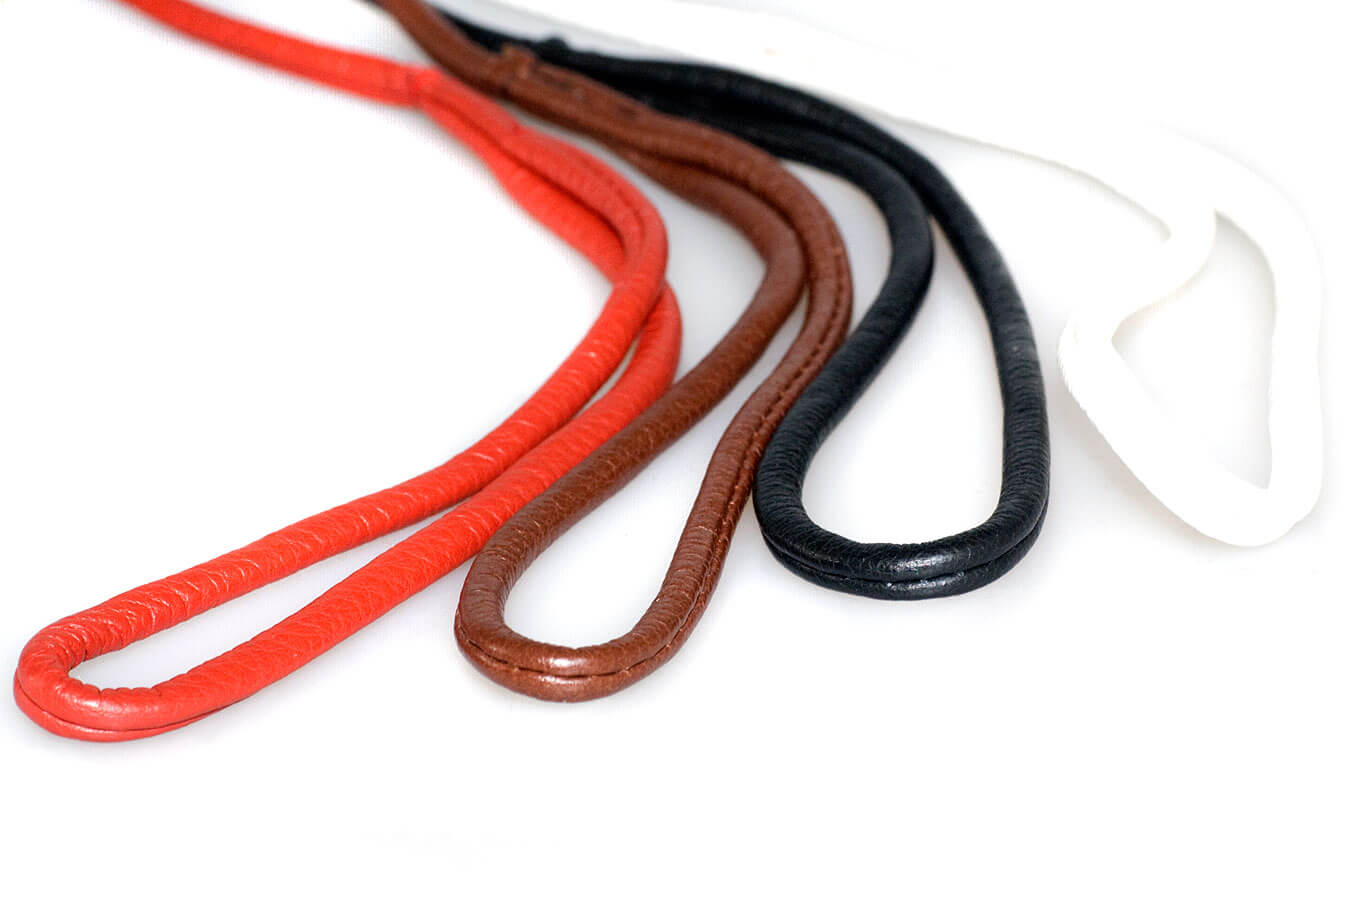 Premium dog show leads are available in red, brown, black and white